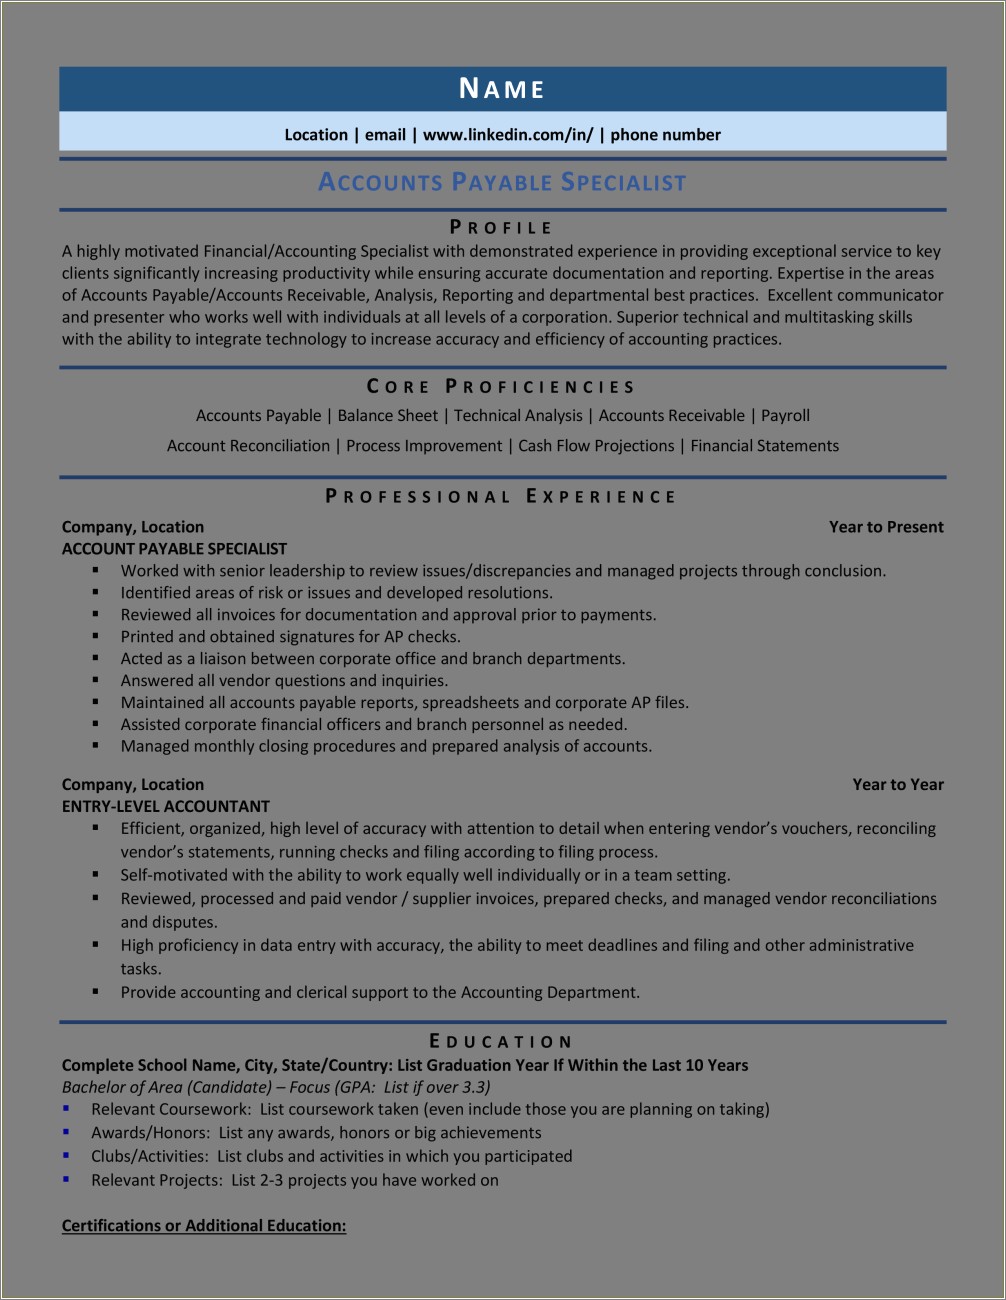 Accounts Payable Specialist Objective Resume